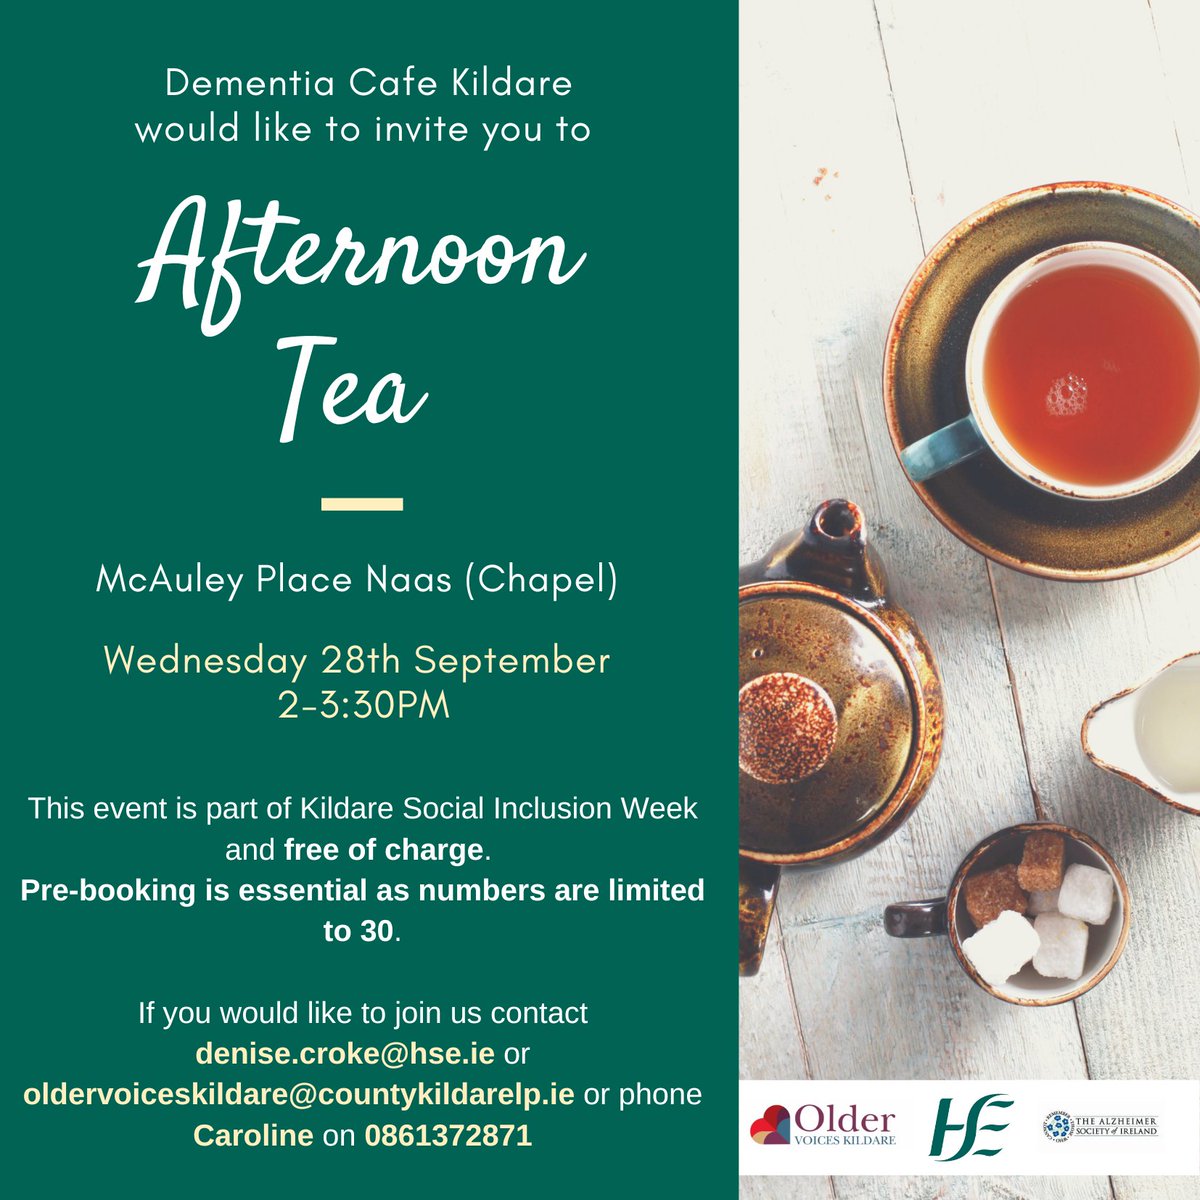 #demenagement #Alzheimer #understandtogether #socialinclusionweek #imincluded Relaunching Dementia Cafe Kildare face to face after 2 years with free afternoon tea. We would love to see you. @HSECHO7 @alzheimersocirl @Older_Voices @ICPOPIreland